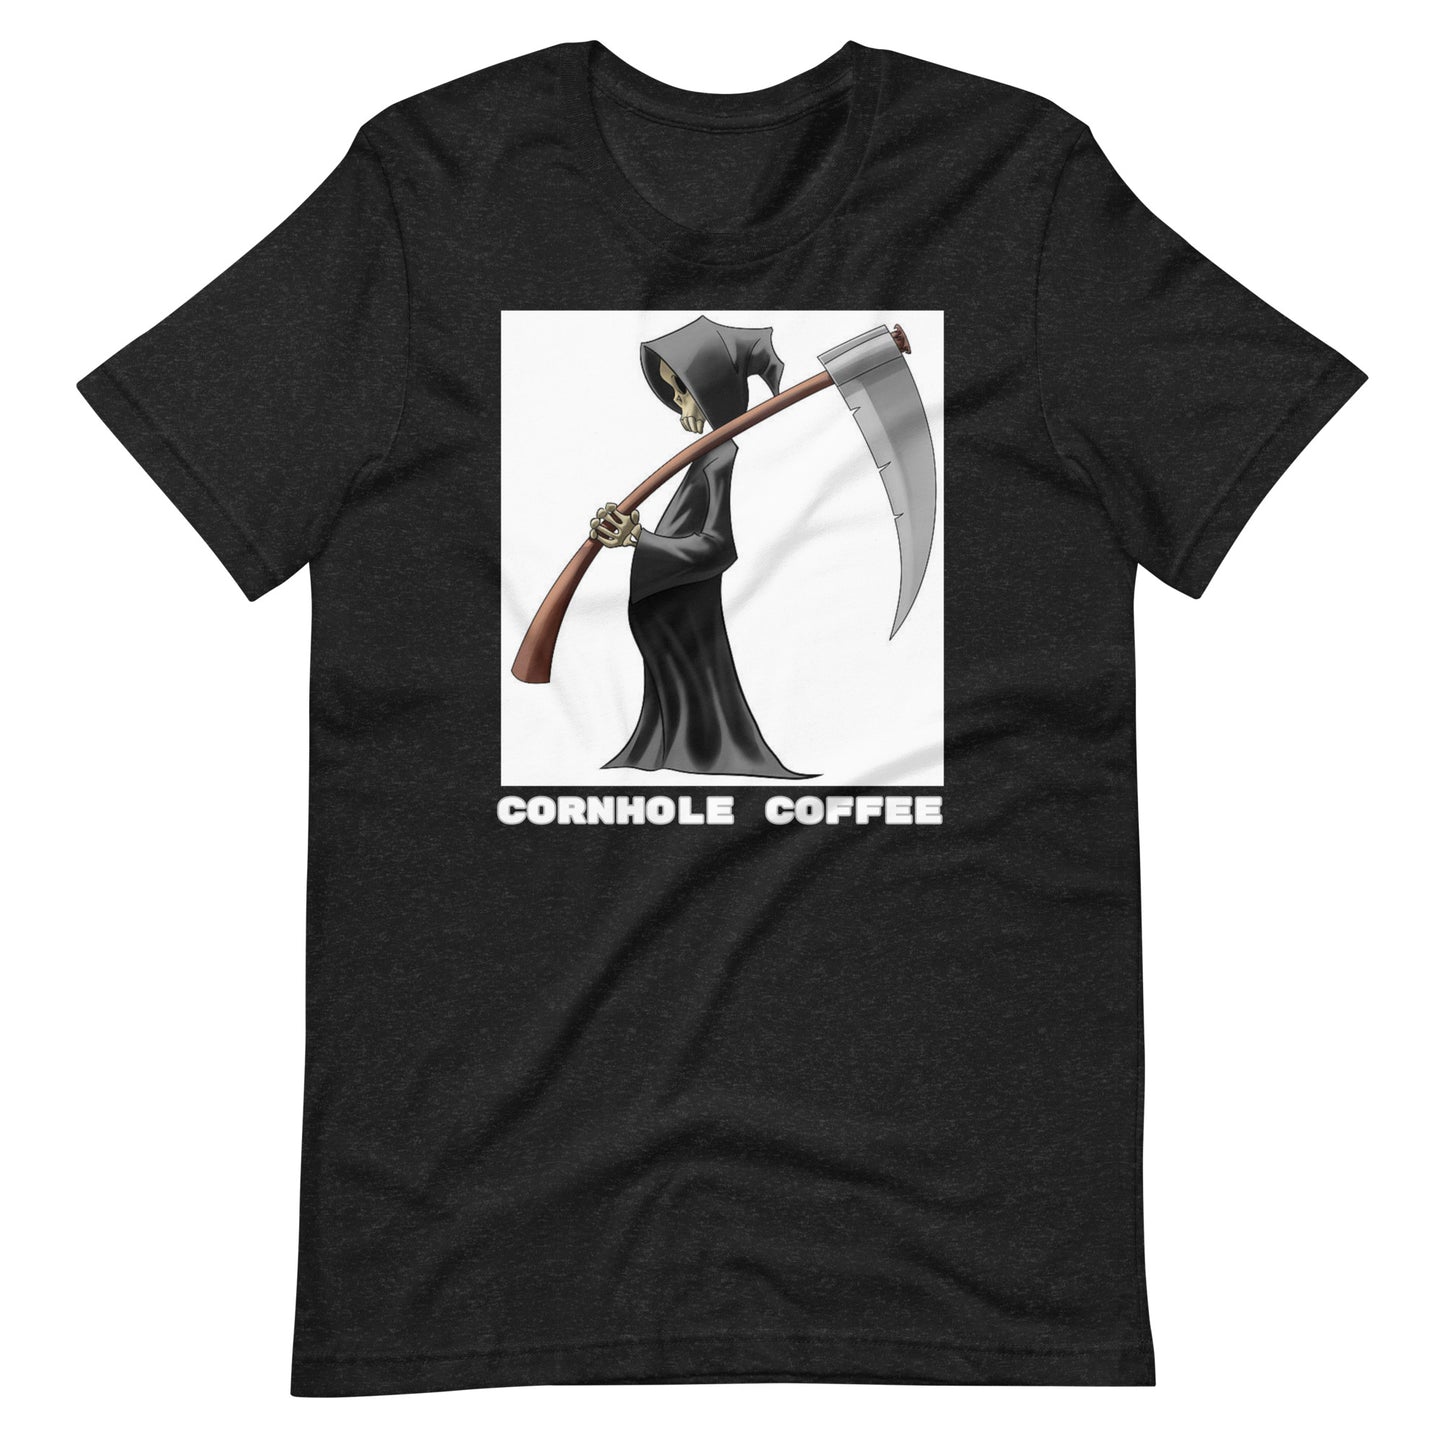 The Coffee Reaper Graphic T-Shirt